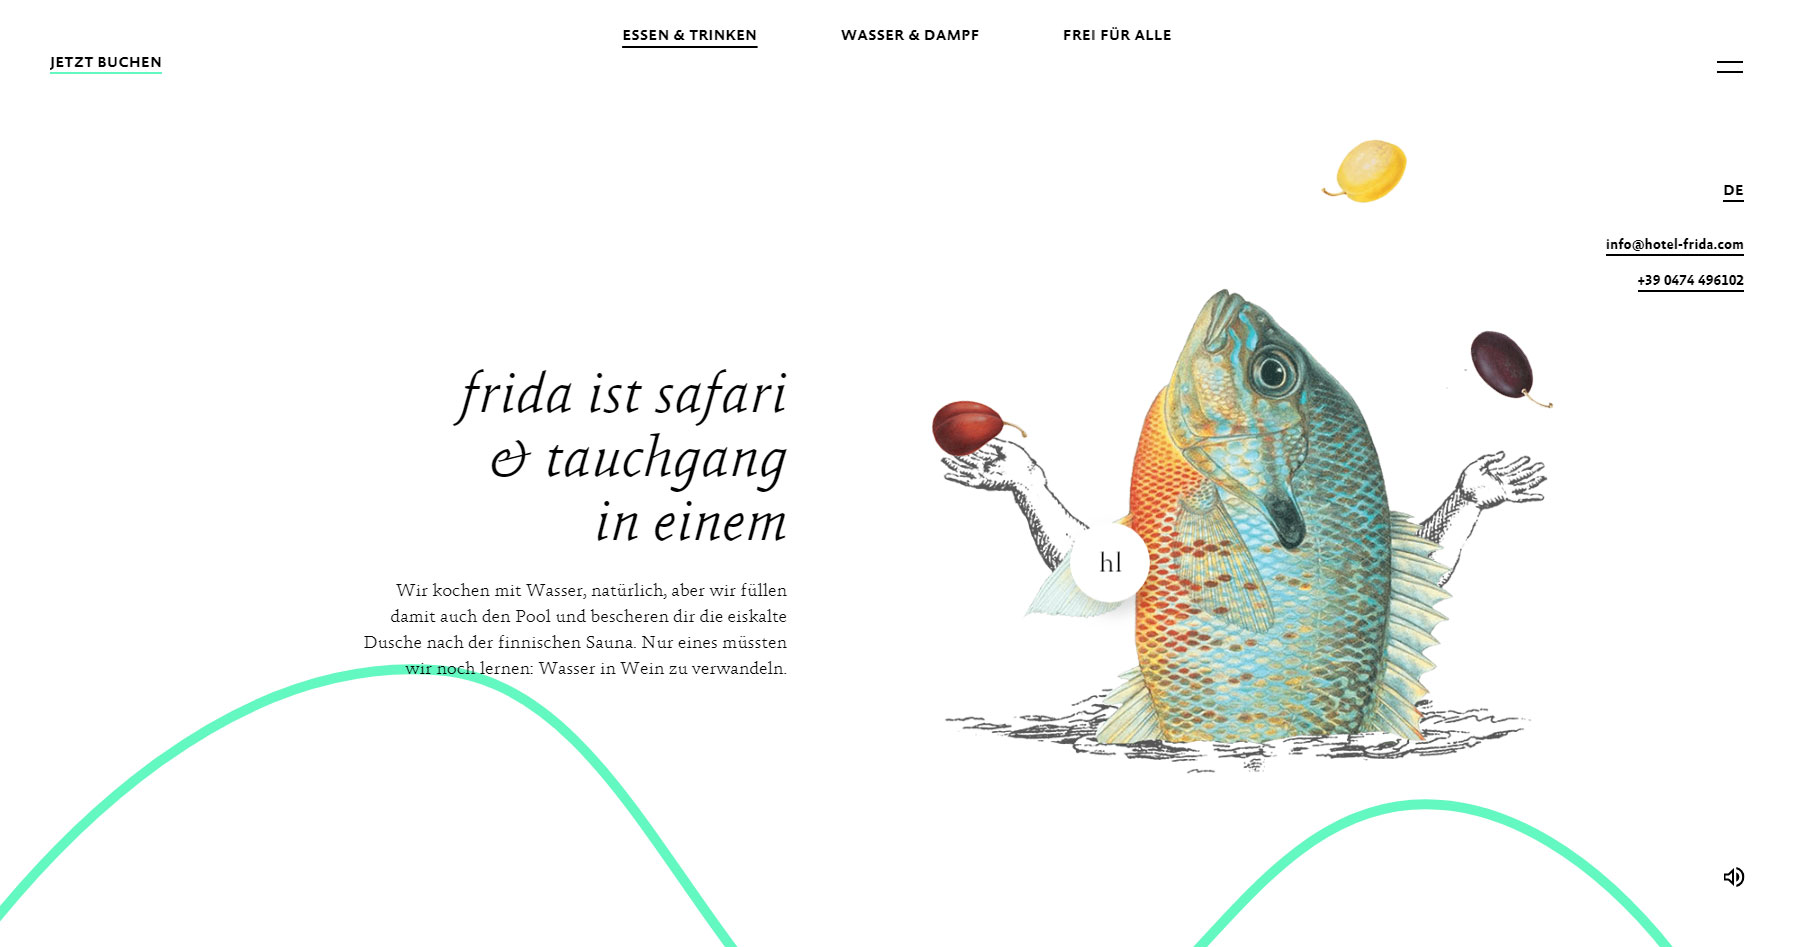 Hotel Frida by the Forest - Website of the Day